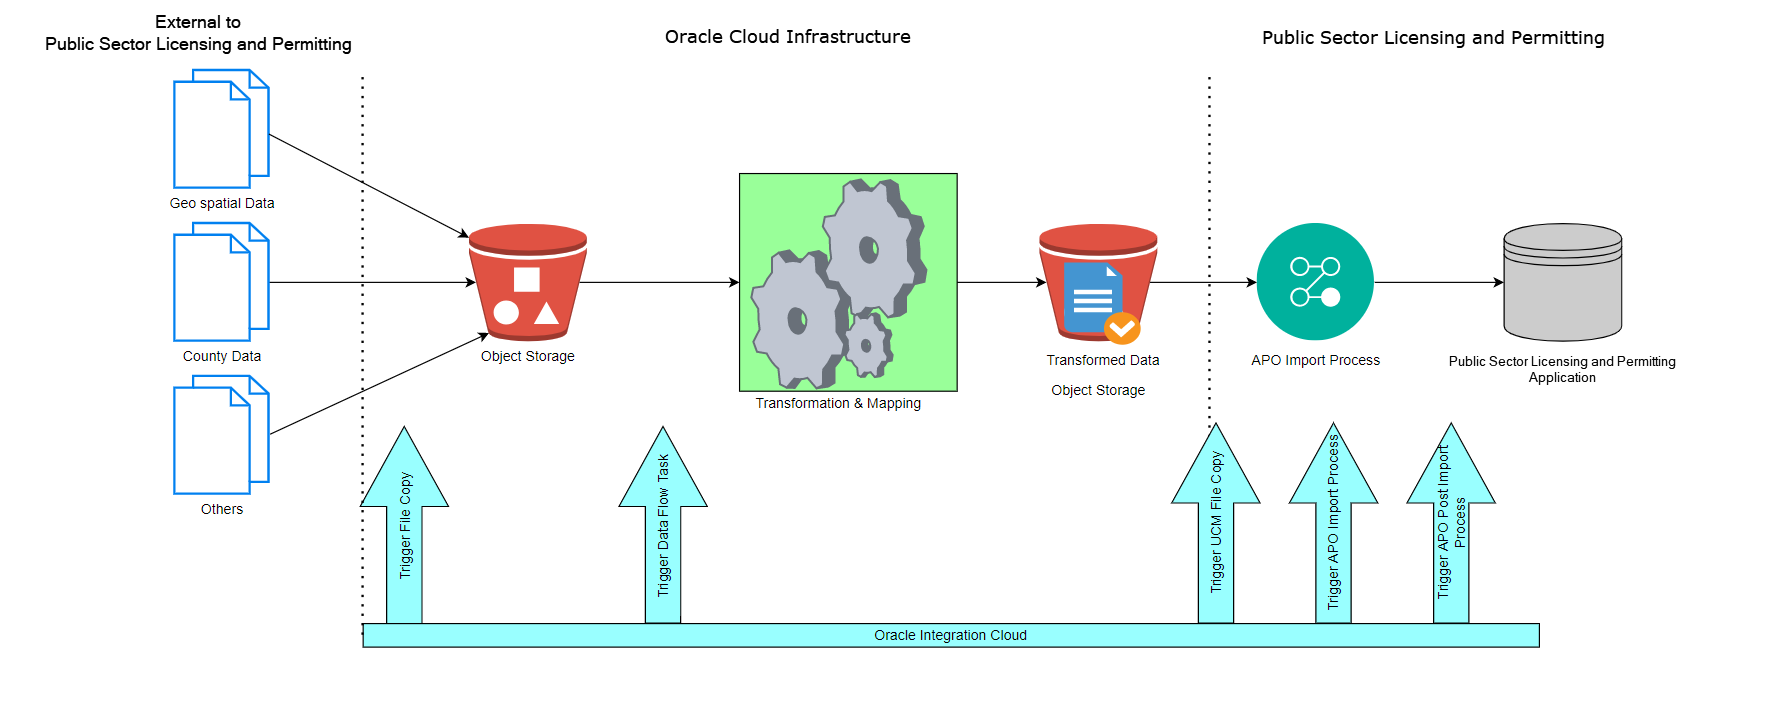 Reference architecture for Oracle Permitting and Licensing end-to-end APO import process